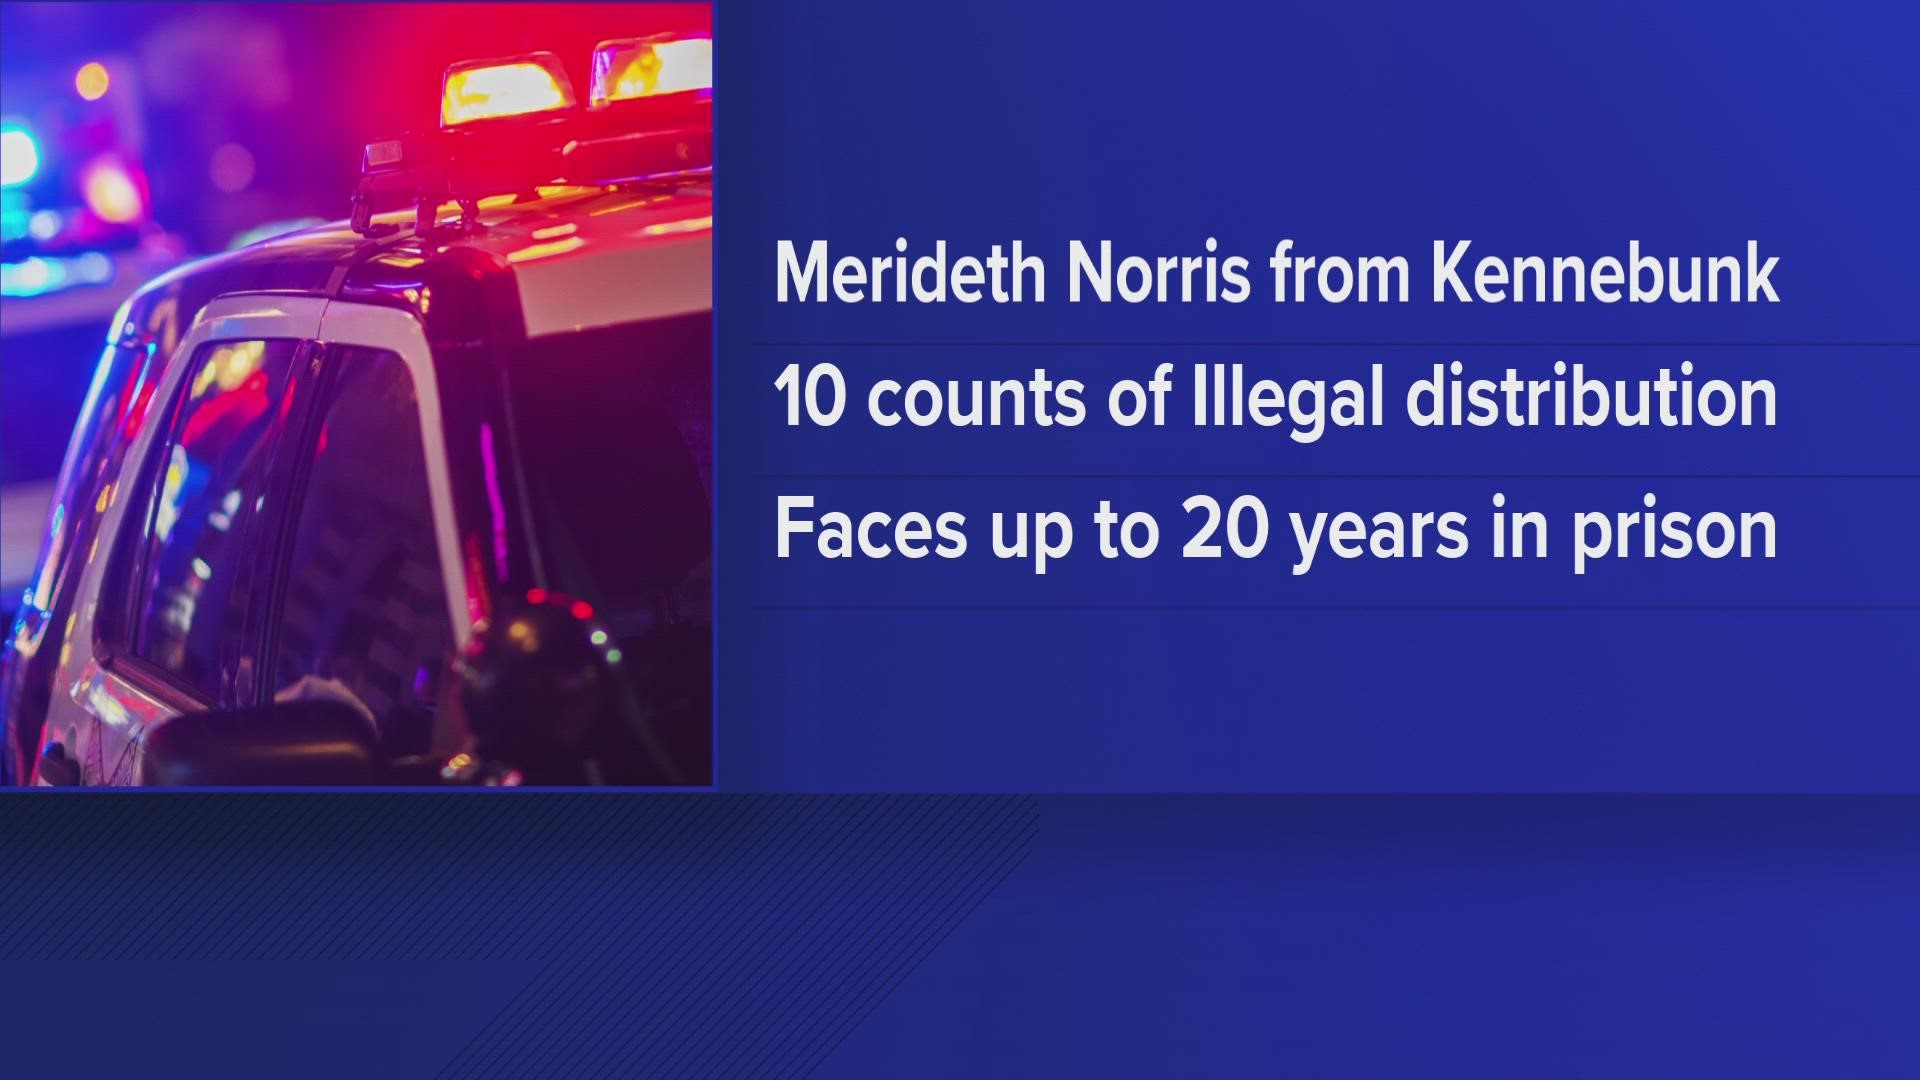 Dr. Merideth C. Norris, 52, of Kennebunk, was charged with 10 counts and faces up to 20 years in prison.